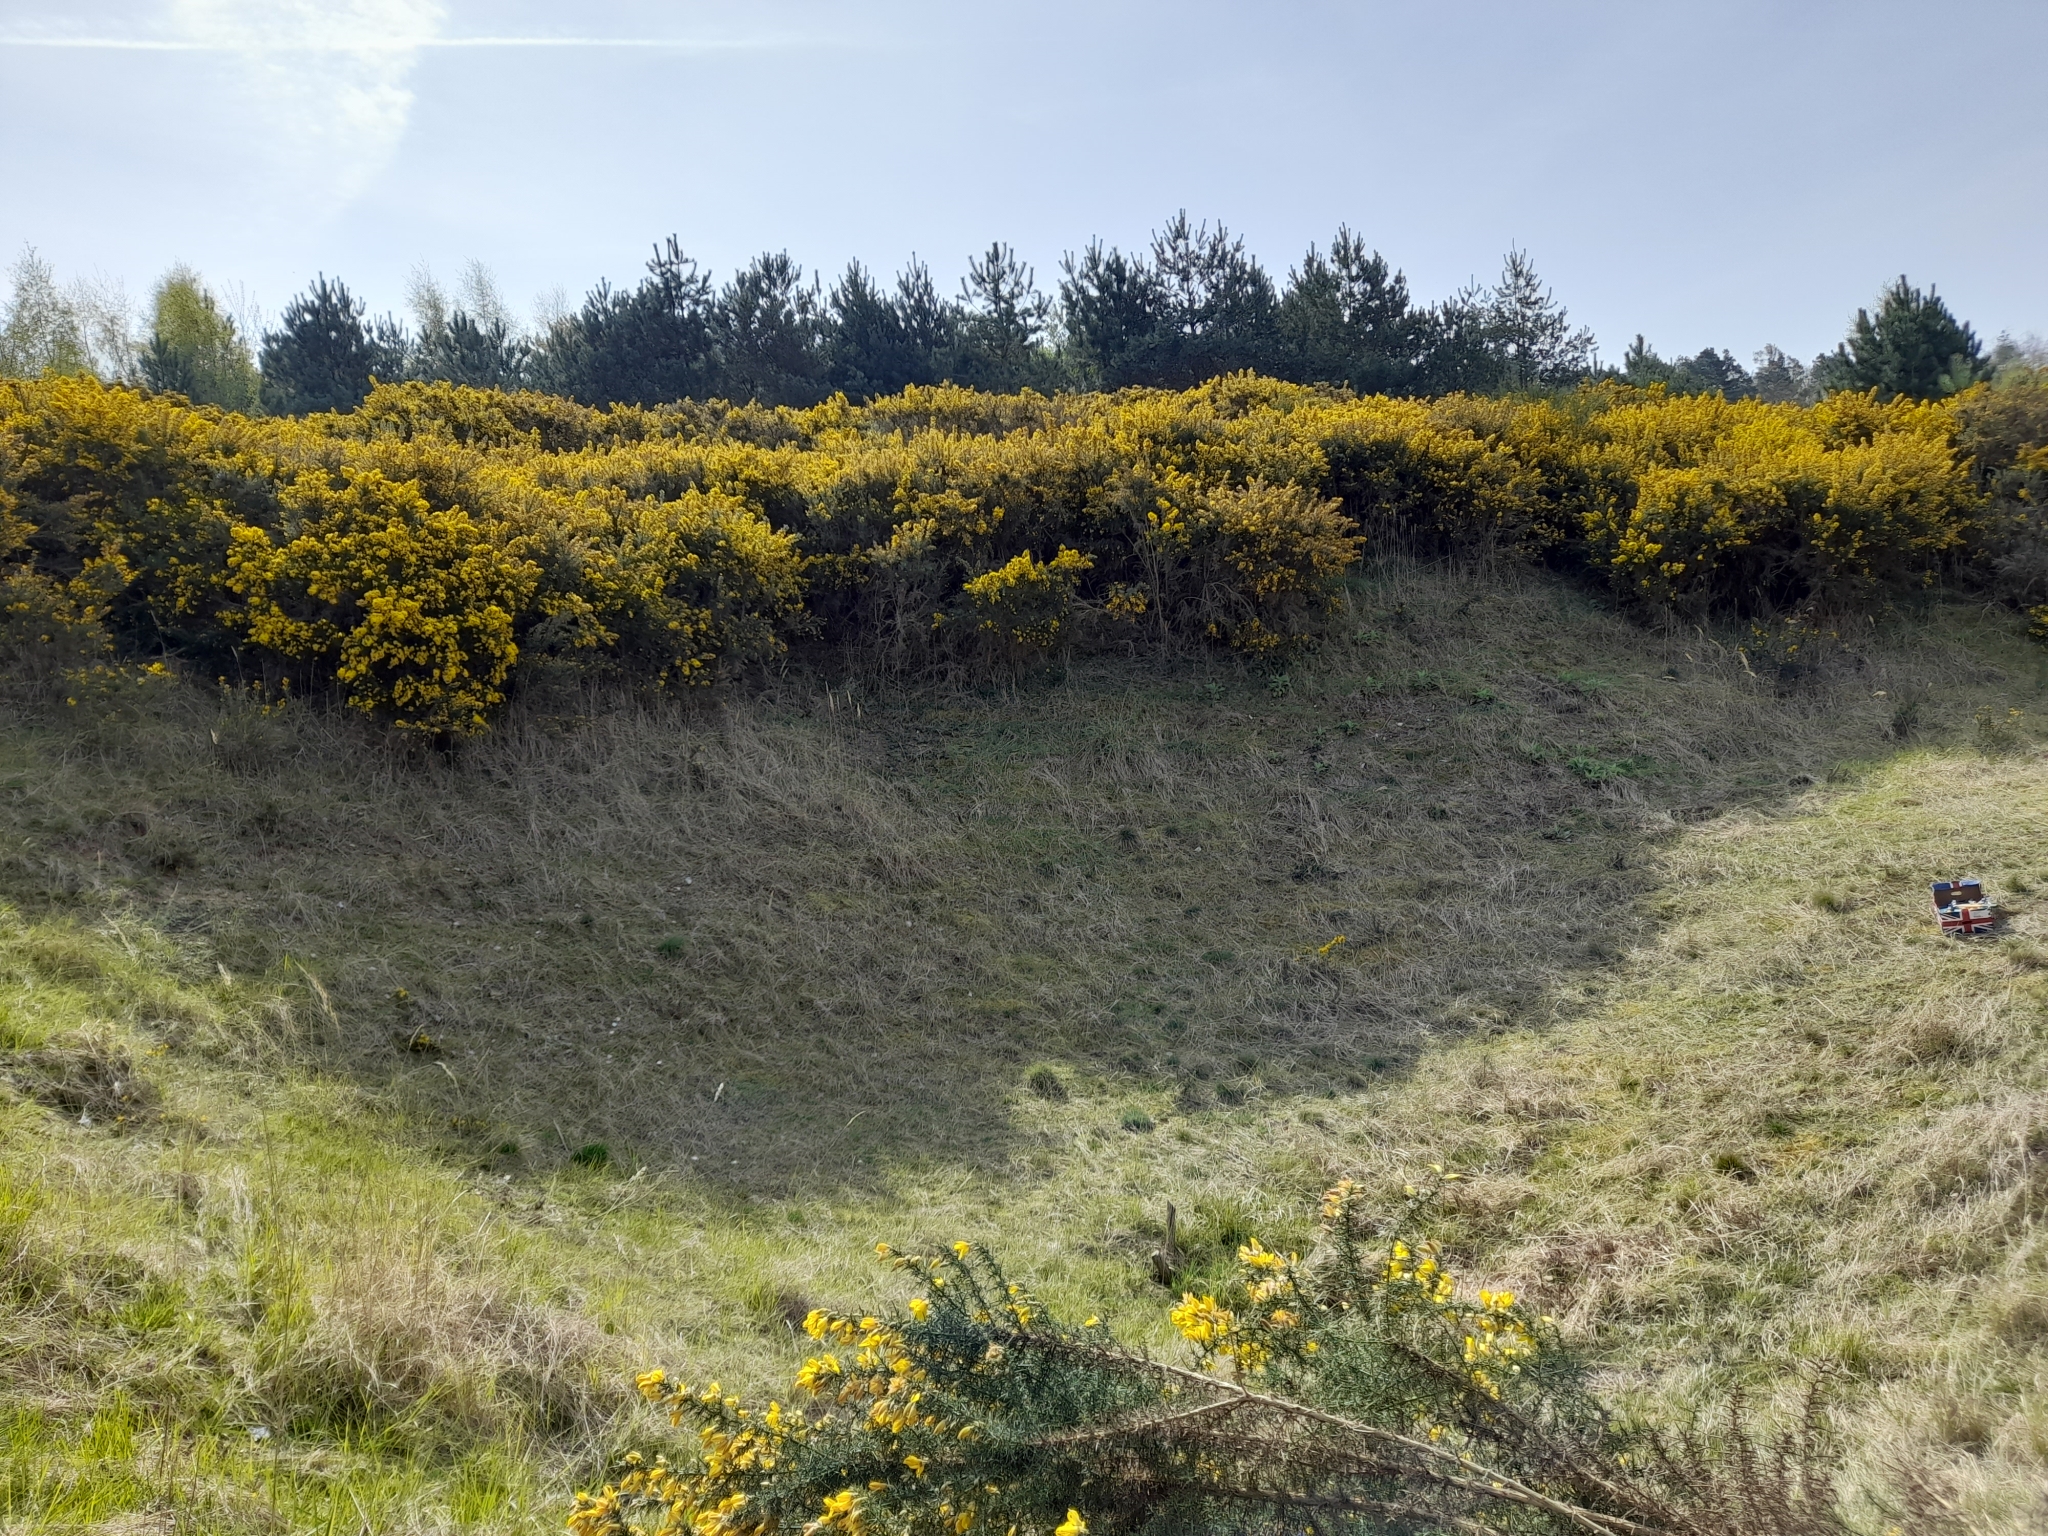 A photo from the FoTF Conservation Event - April 2022 - Scrub Clearance at Mildenhall Mugwort Pits : A view across the pit showing the Gorse at the top of the pit